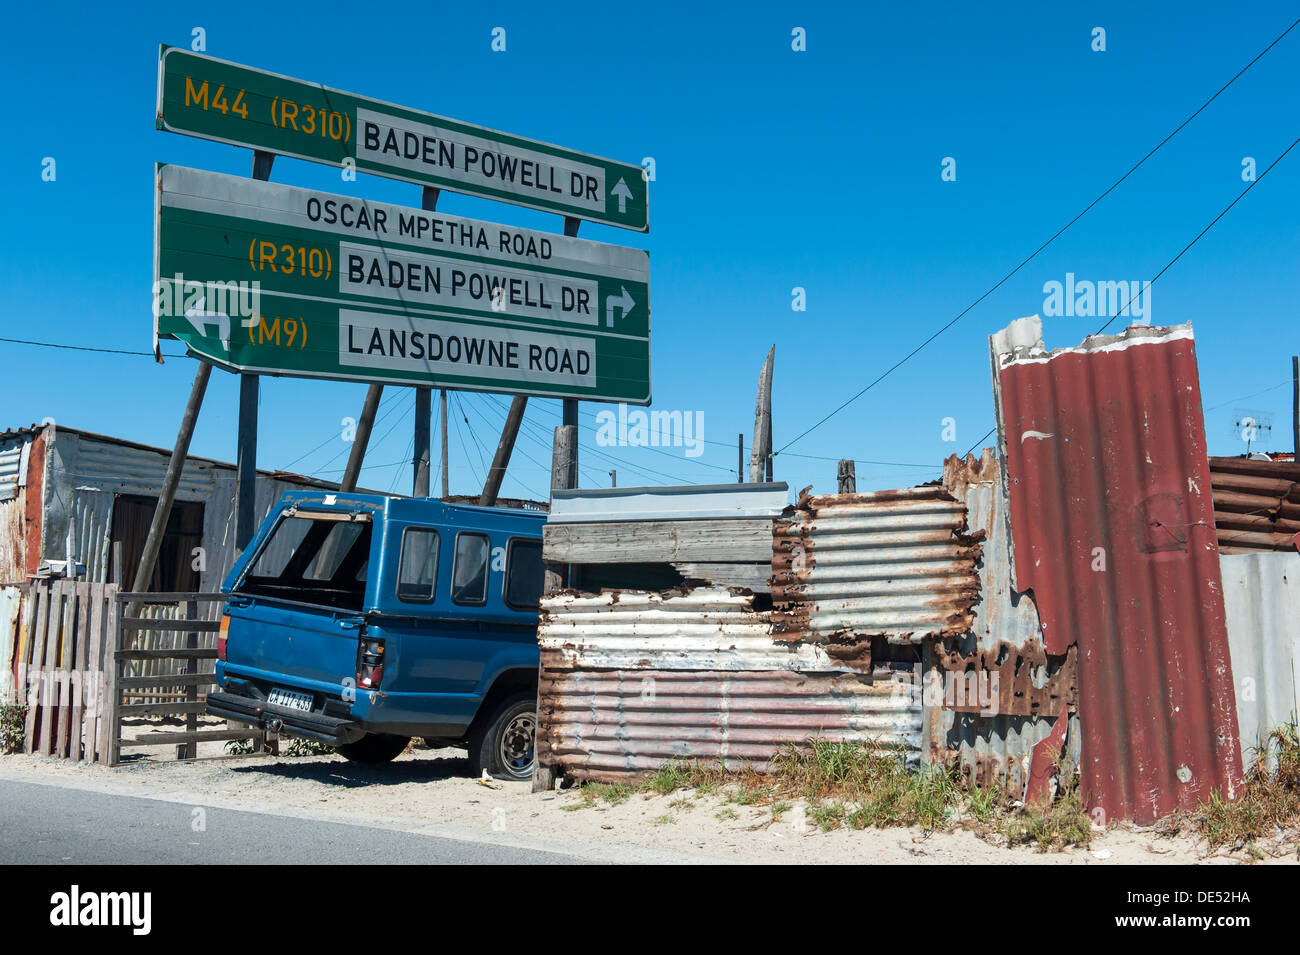 Tin shacks, car and roadsign in in Khayelitsha, a partially informal township in Cape Town, South Africa Stock Photo